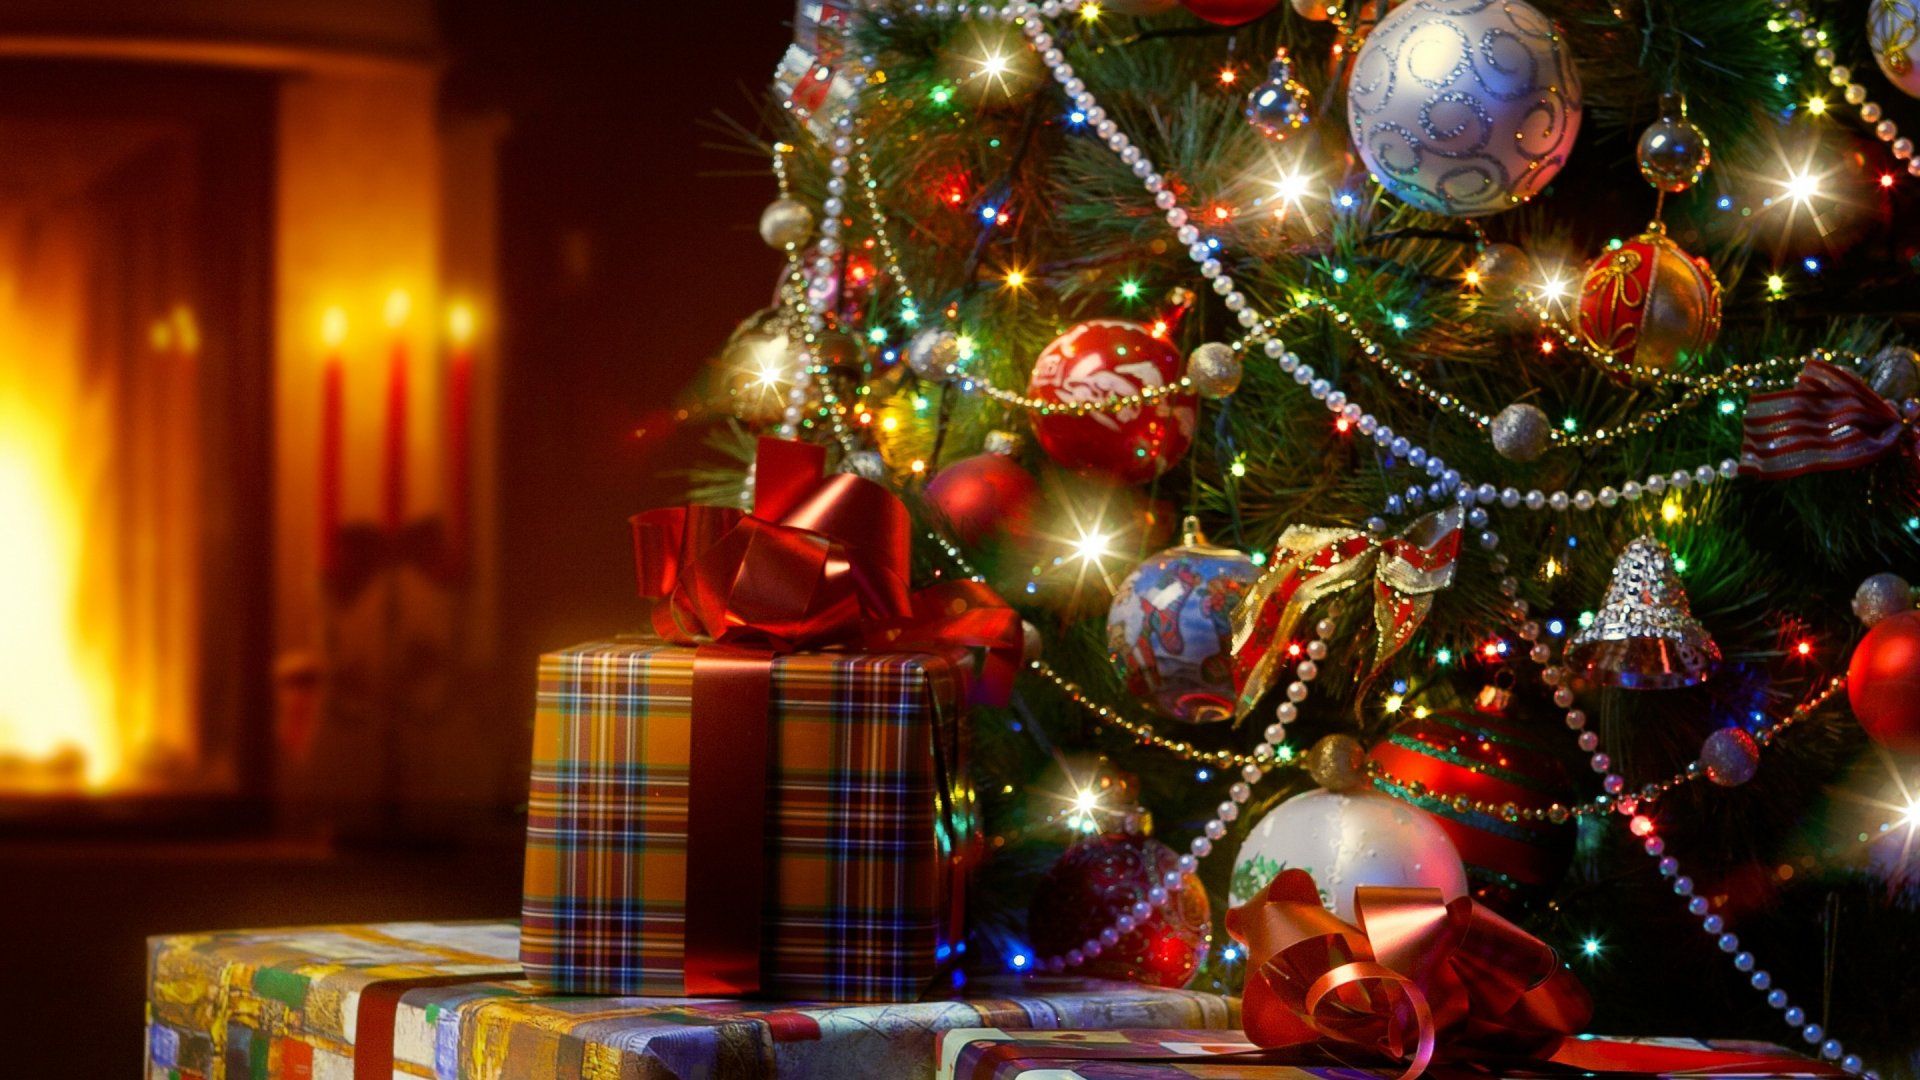 Download desktop wallpaper Merry Christmas Gifts Under Tree Holiday 1920x1080